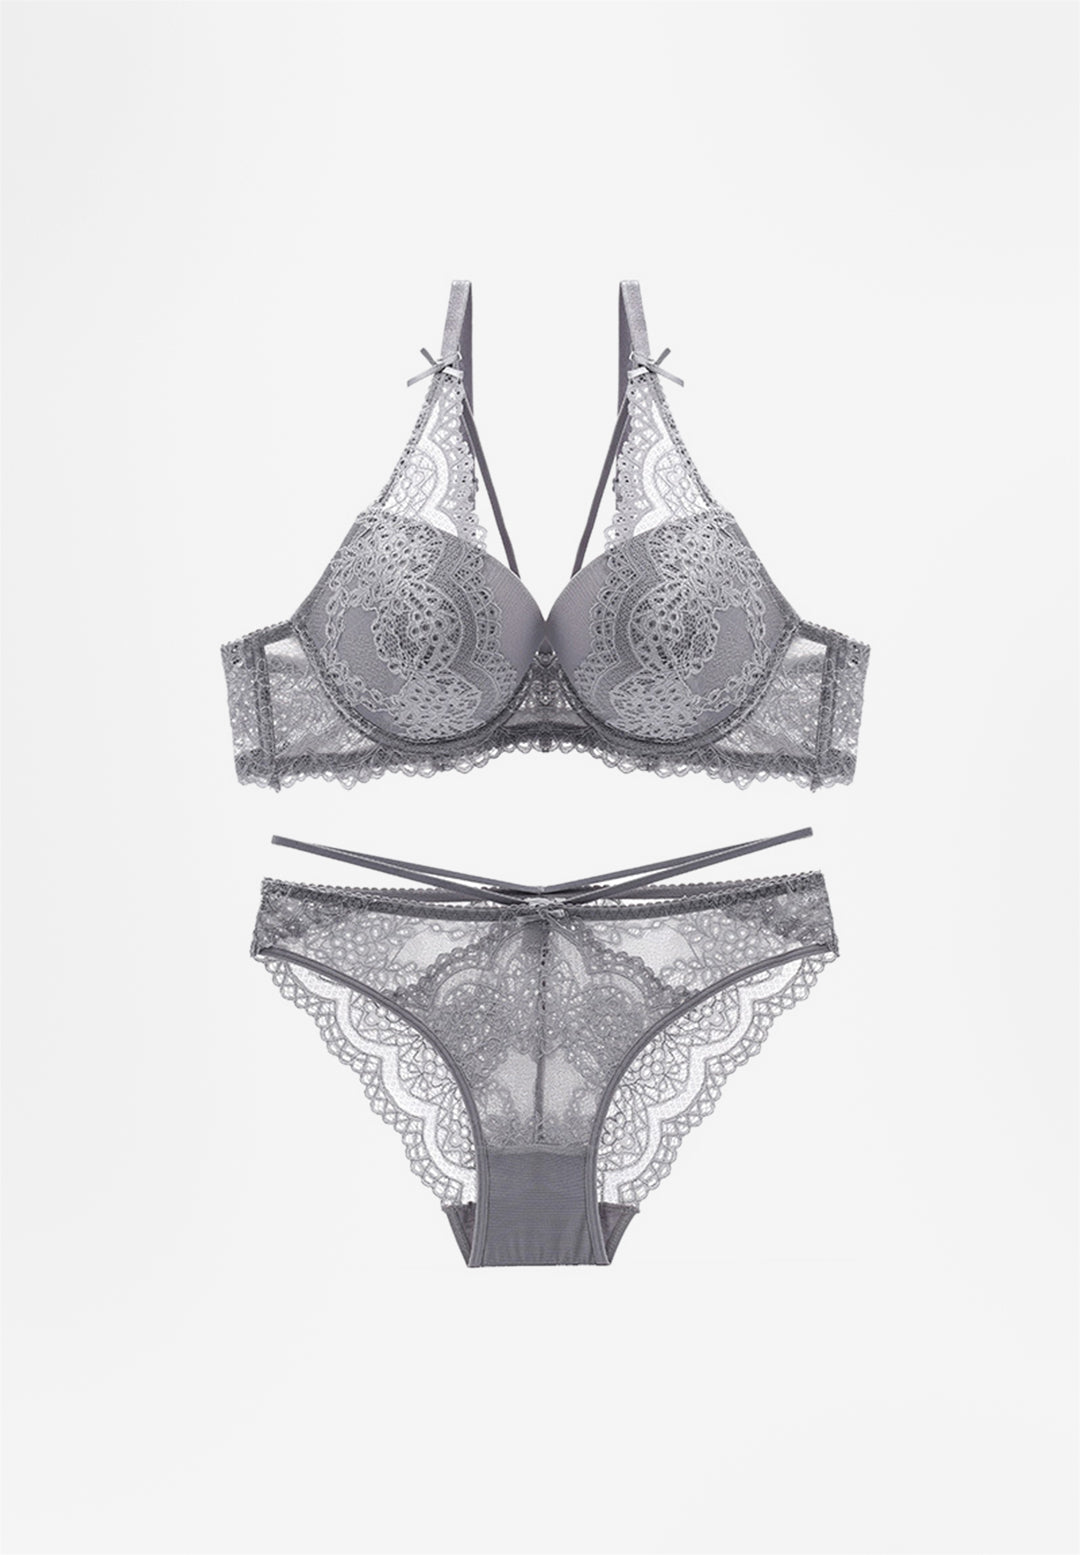 Padded Underwired Lace Bra Set